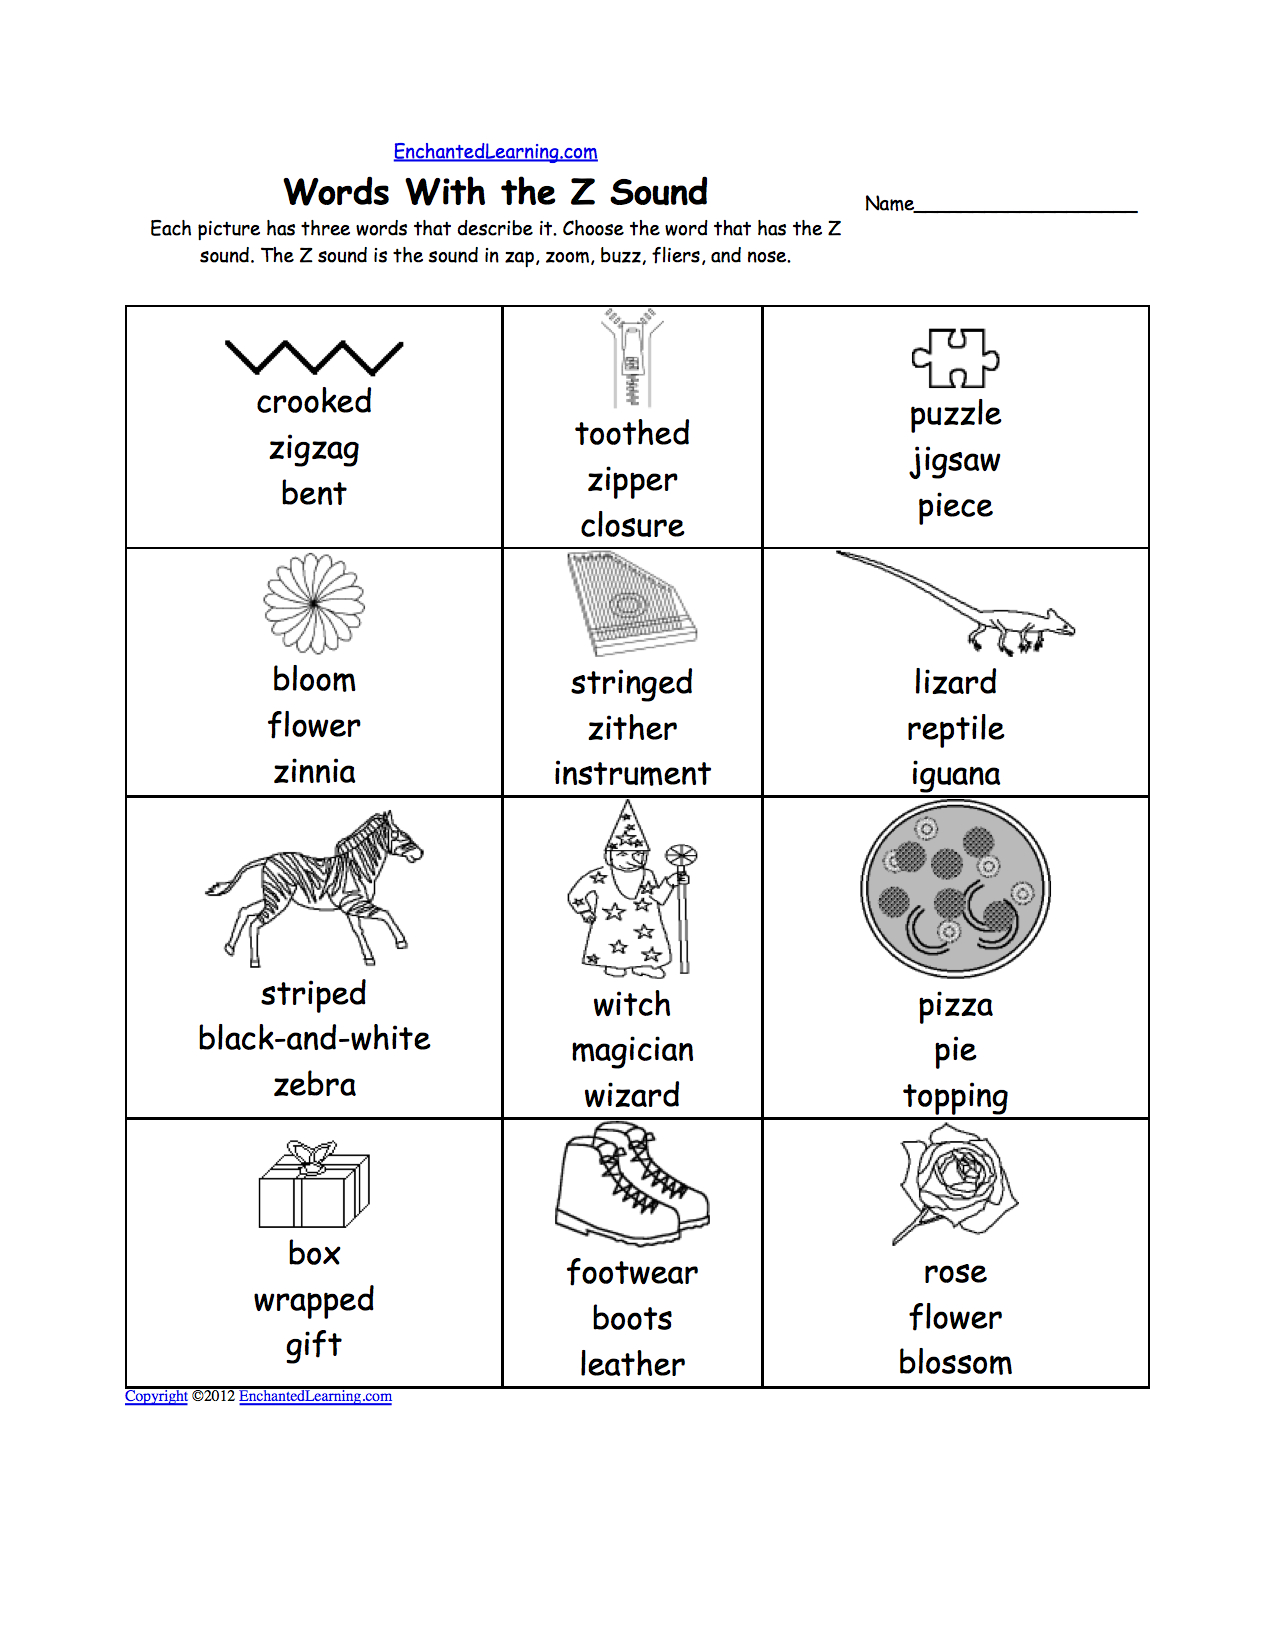 Phonics Picture Dictionary Activities And Worksheets To Print With Regard To Dictionary Worksheets Pdf